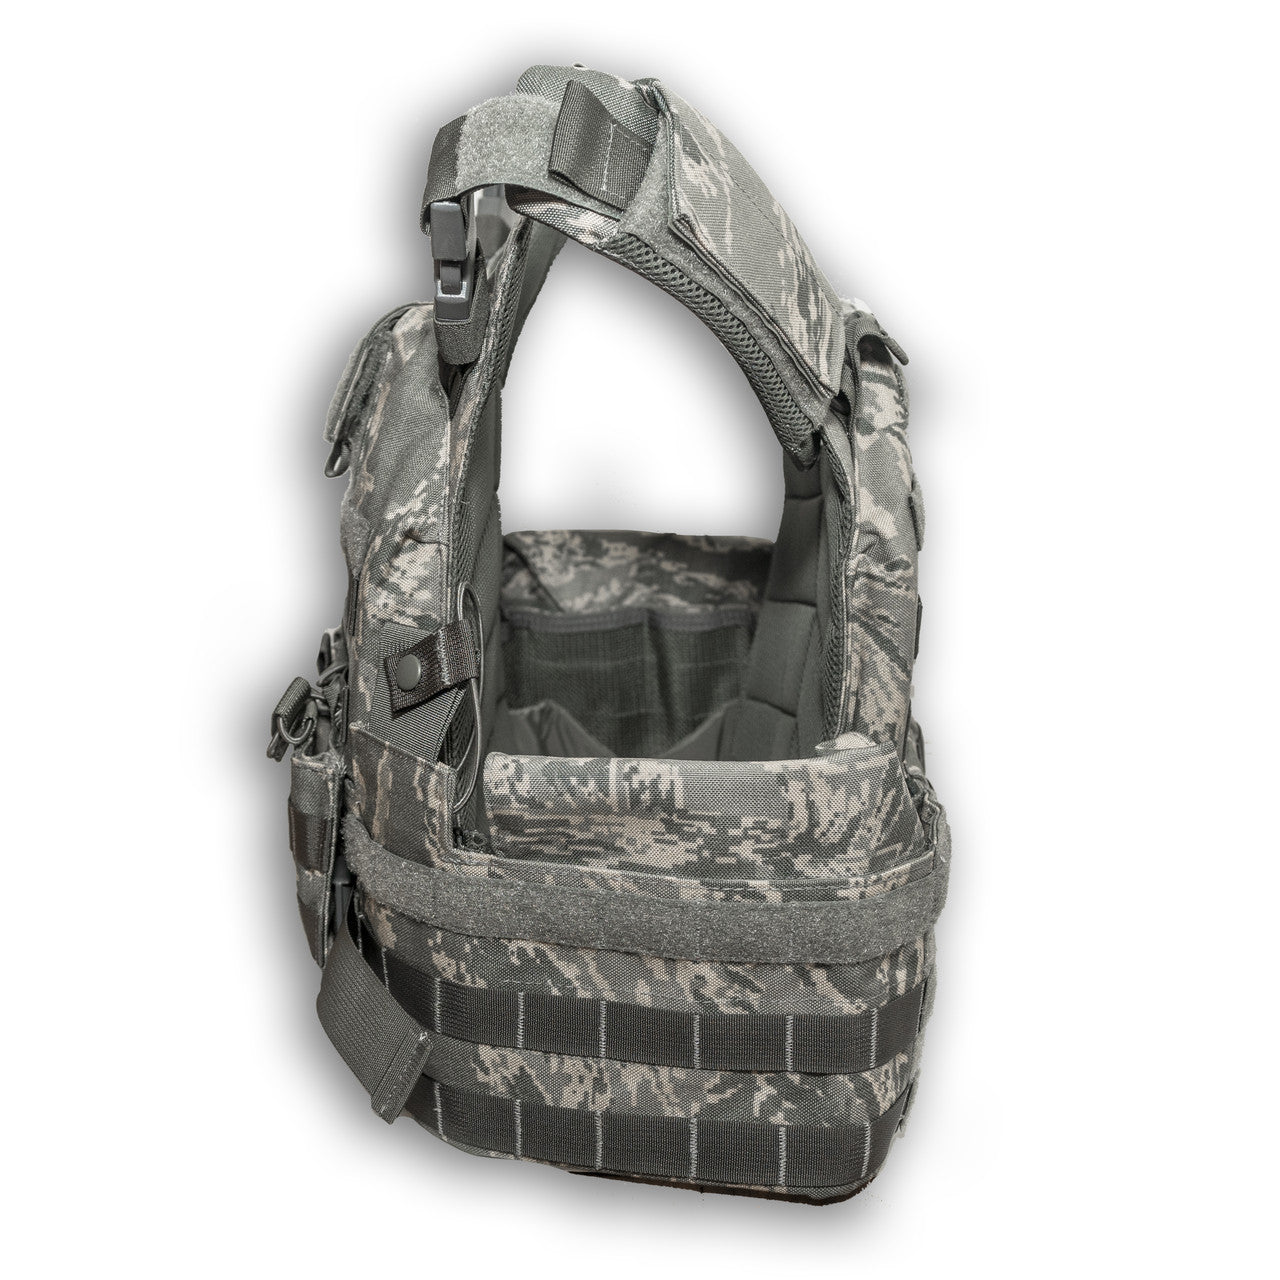 T3 Geronimo 2 Plate Carrier with Quad Release System - ABU Tiger - FINAL SALE